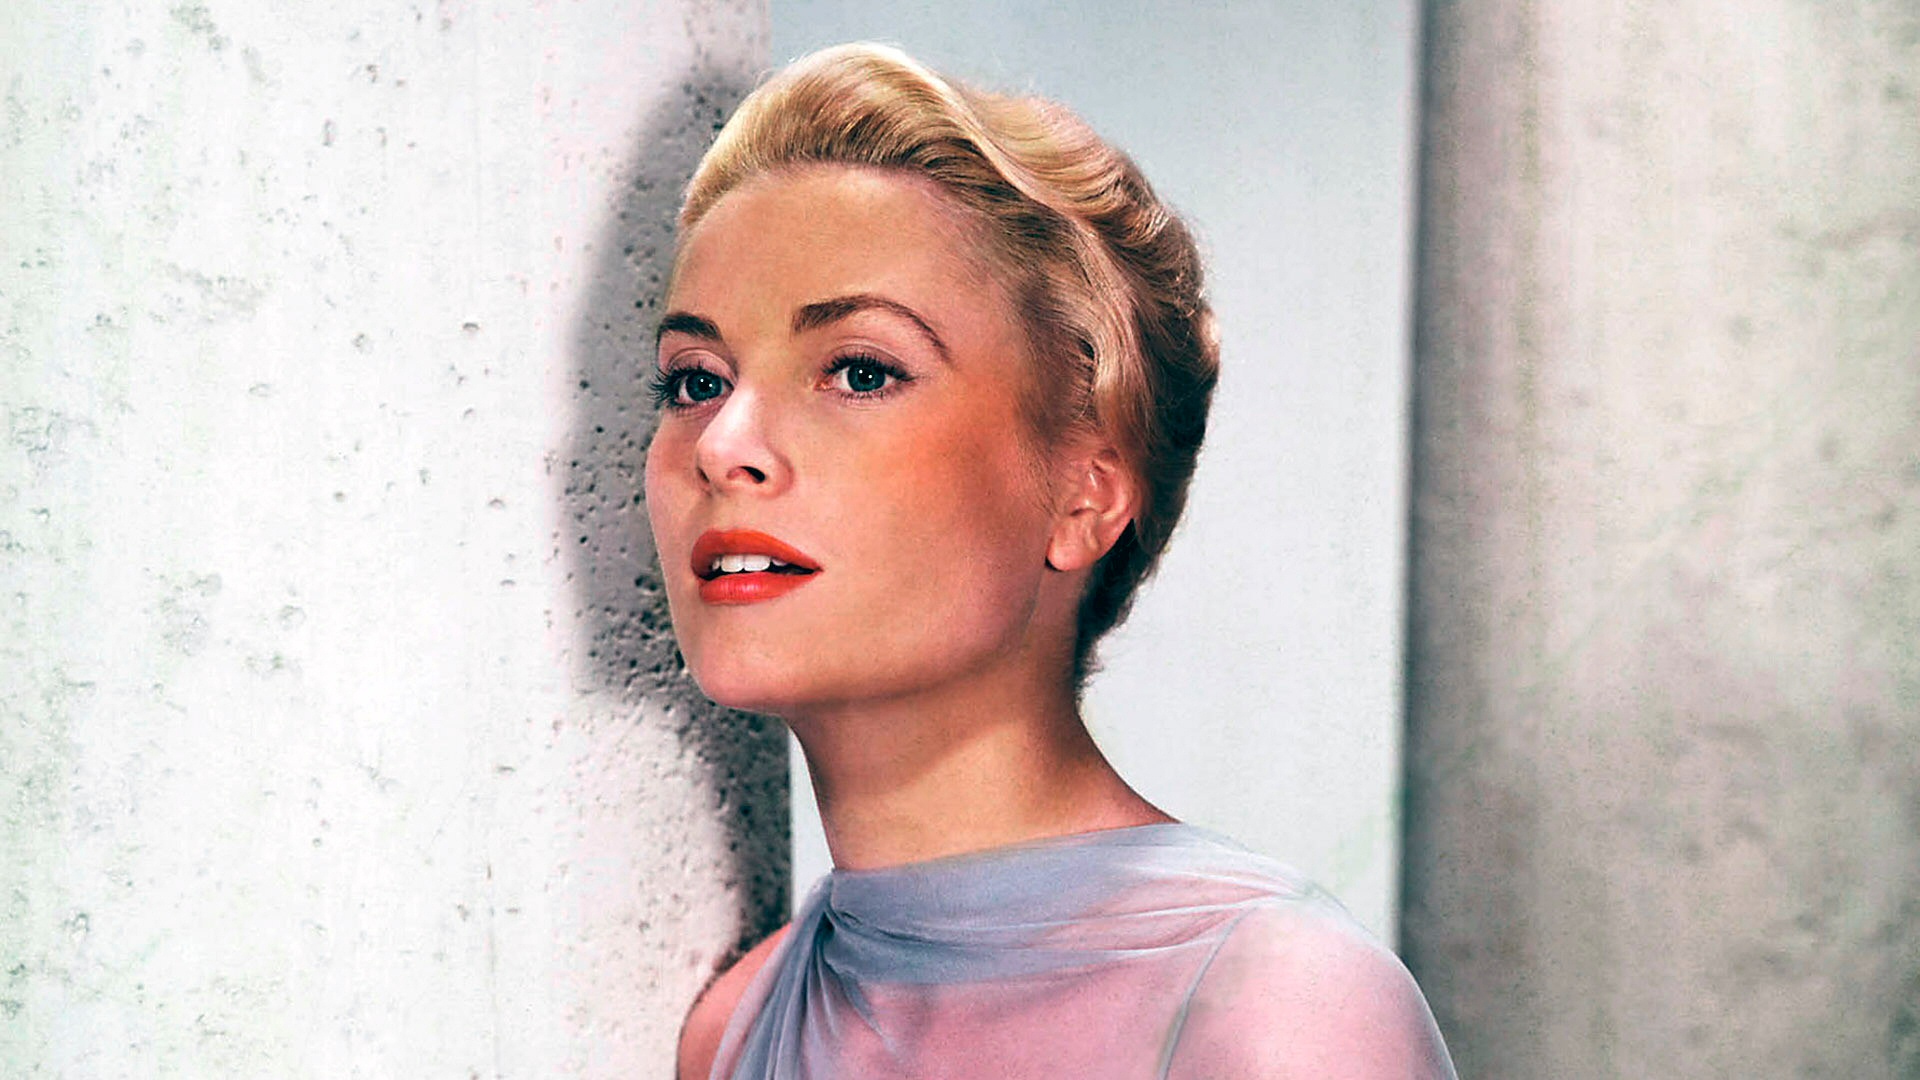 Grace Kelly Wallpaper Photo Picture Background